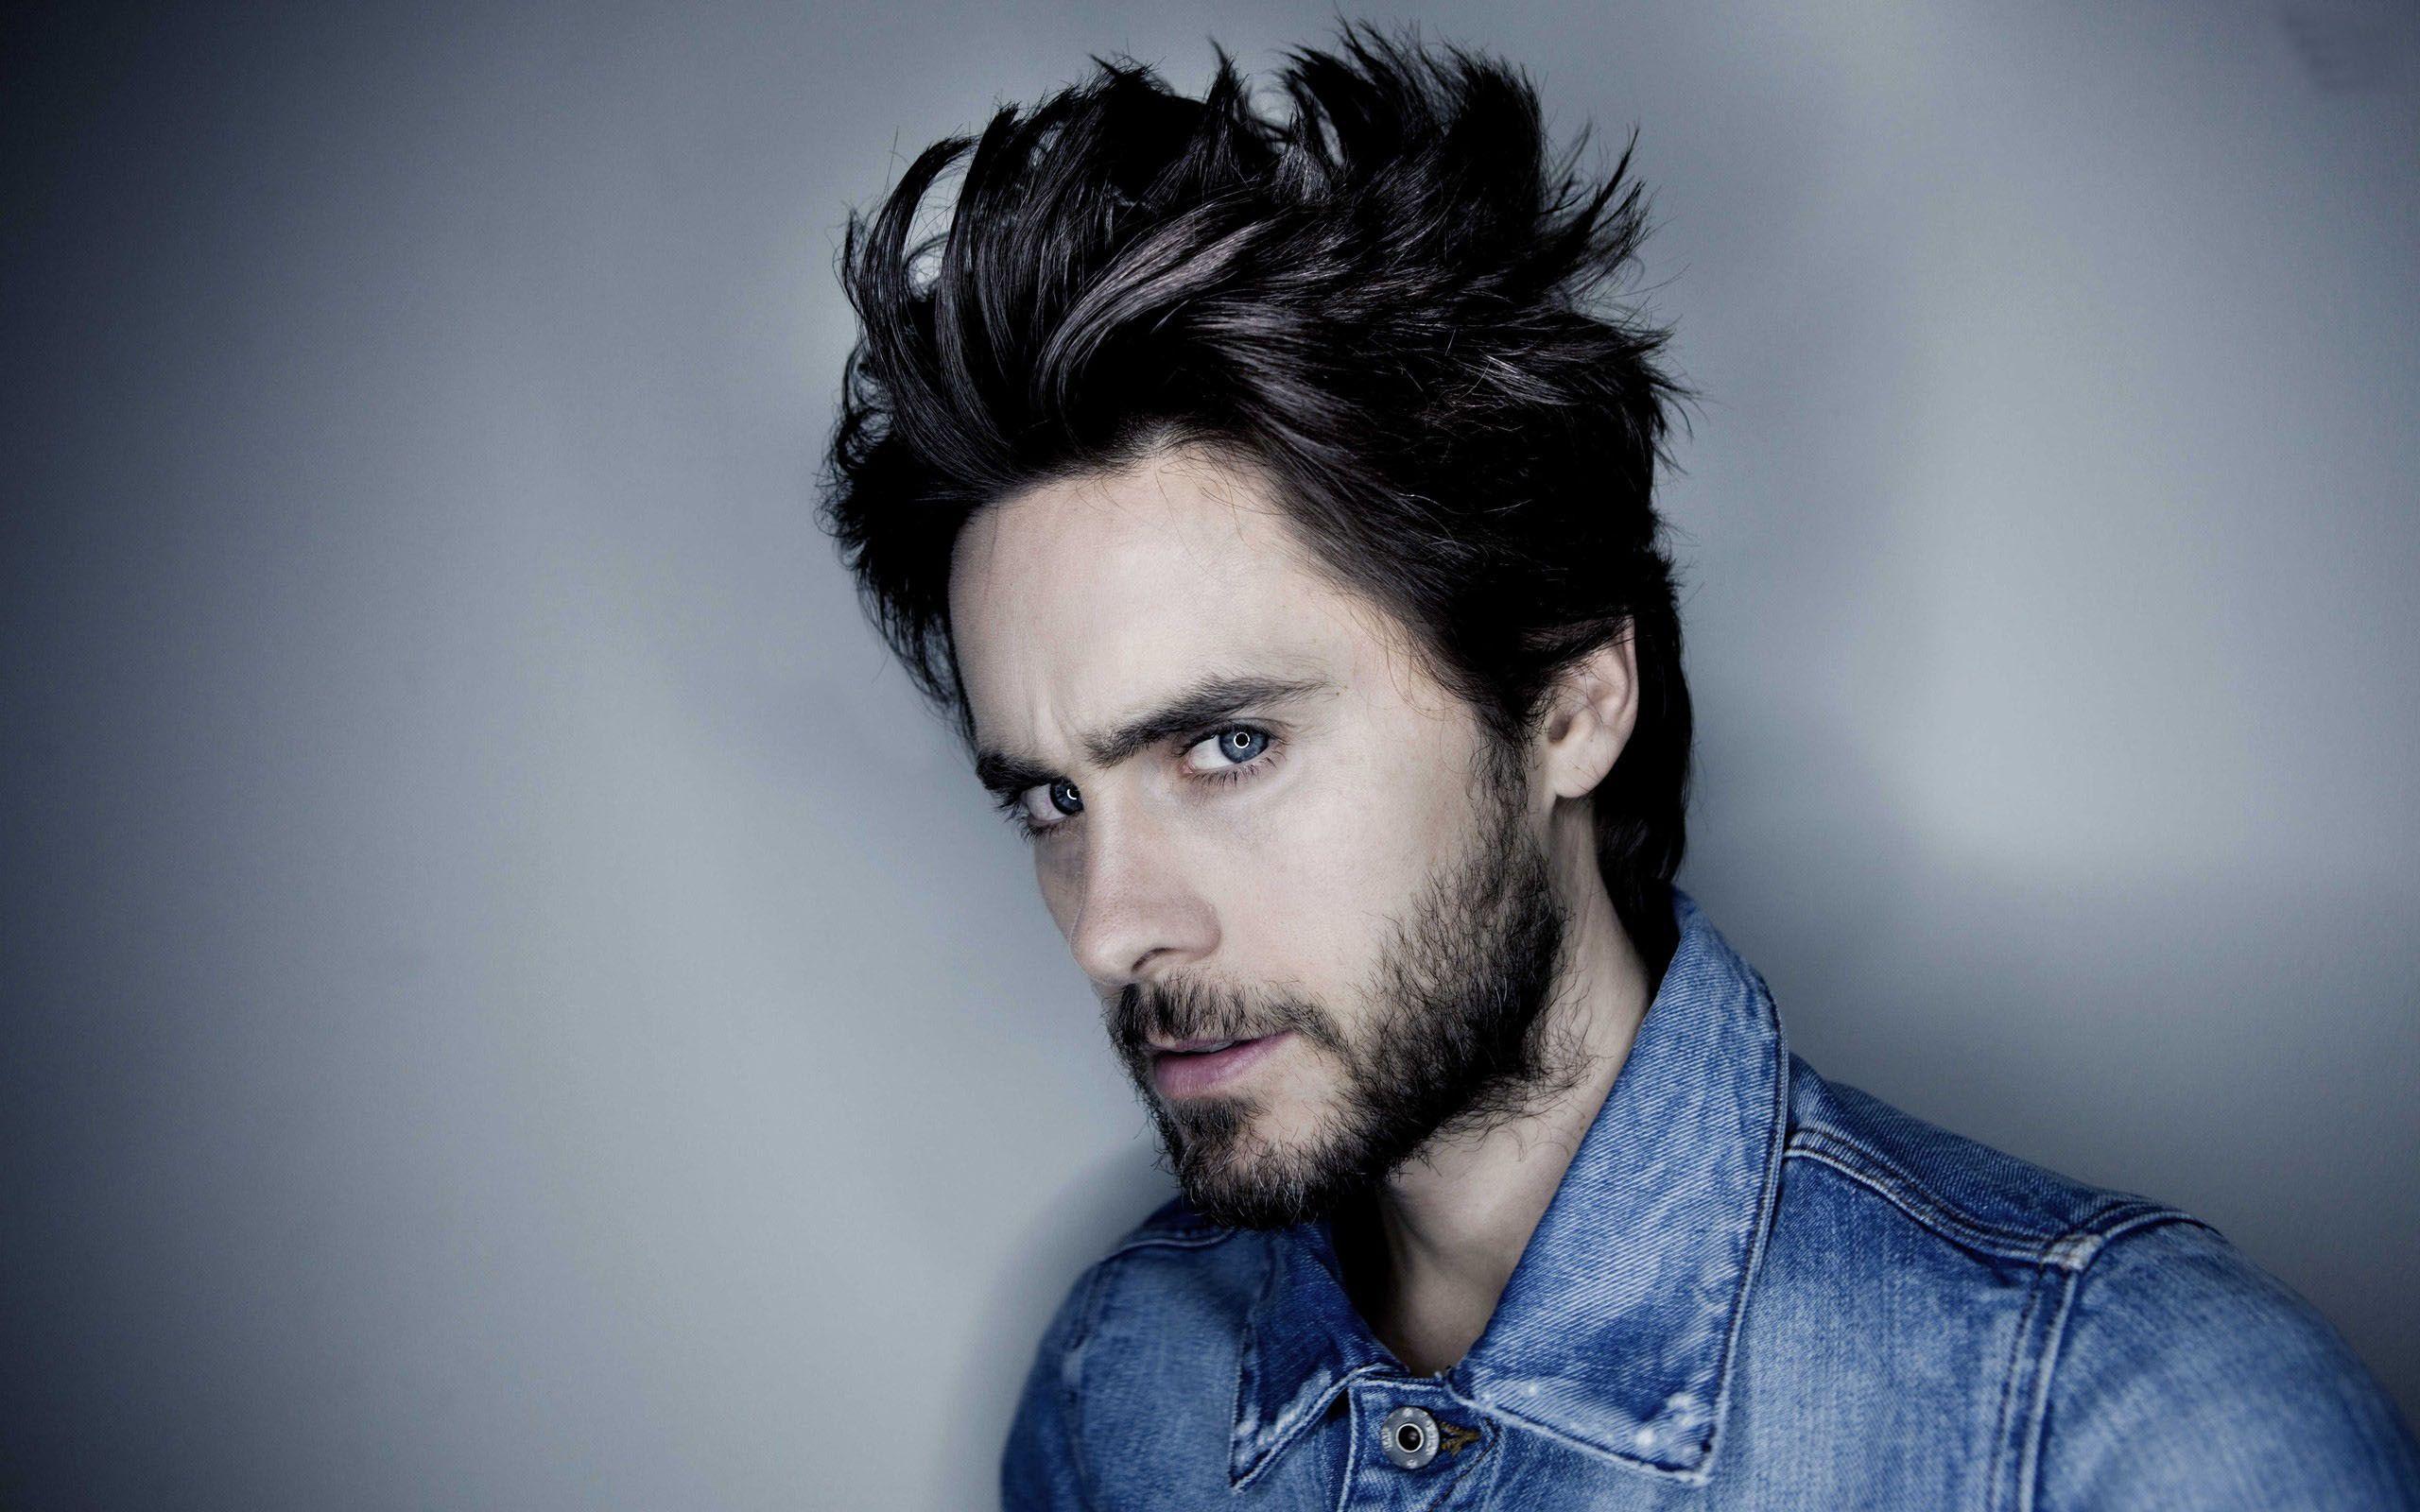 Jared Leto Wallpaper High Resolution and Quality Download